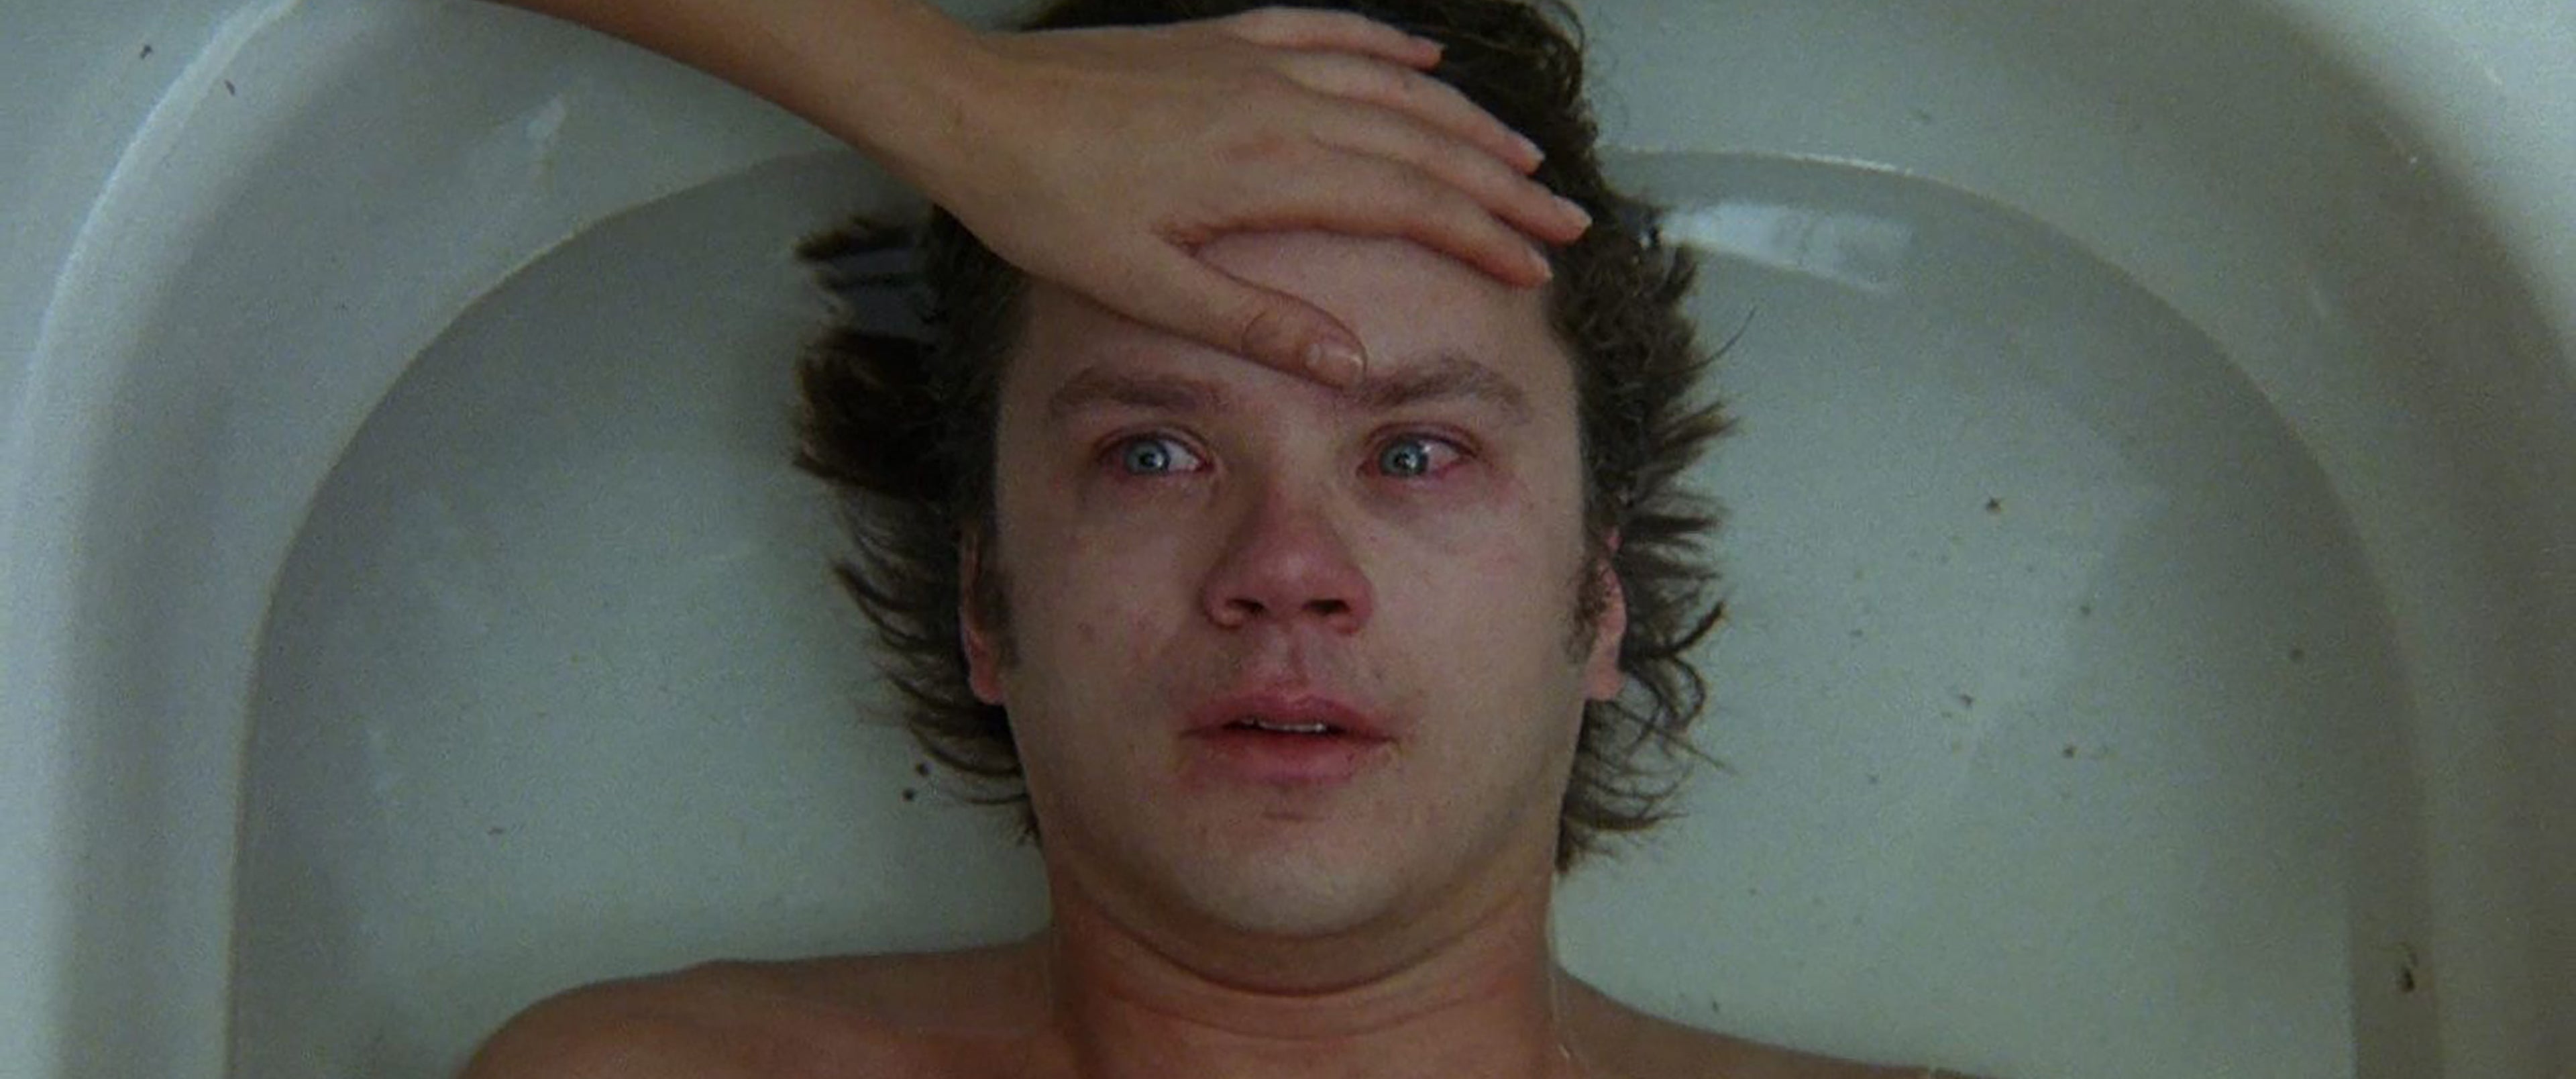 Still image from Jacob's Ladder. Tim Robbins lays in bath, as someone sets their hand on his forehead